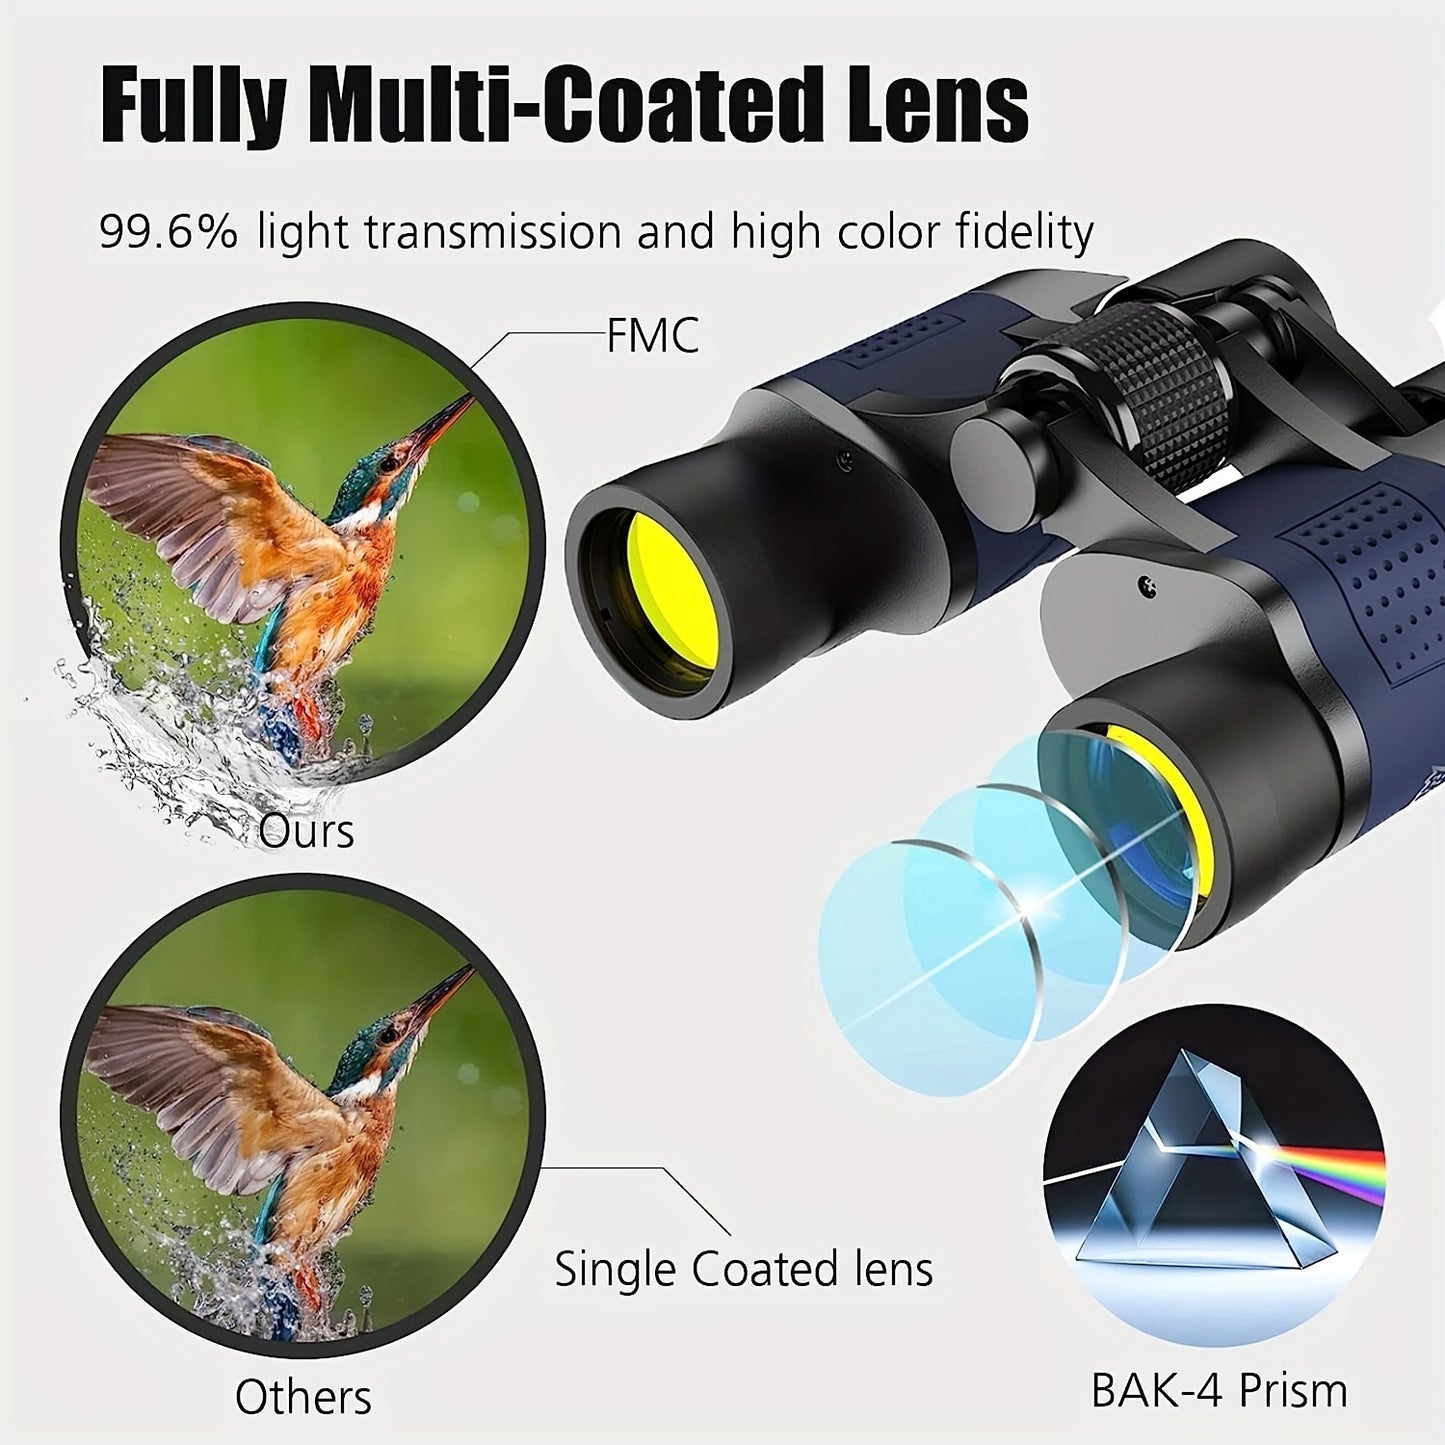 60x60 High Power Binoculars With Coordinates Portable Telescope LowLight Night Vision For Hunting Sports Travel Sightseeing